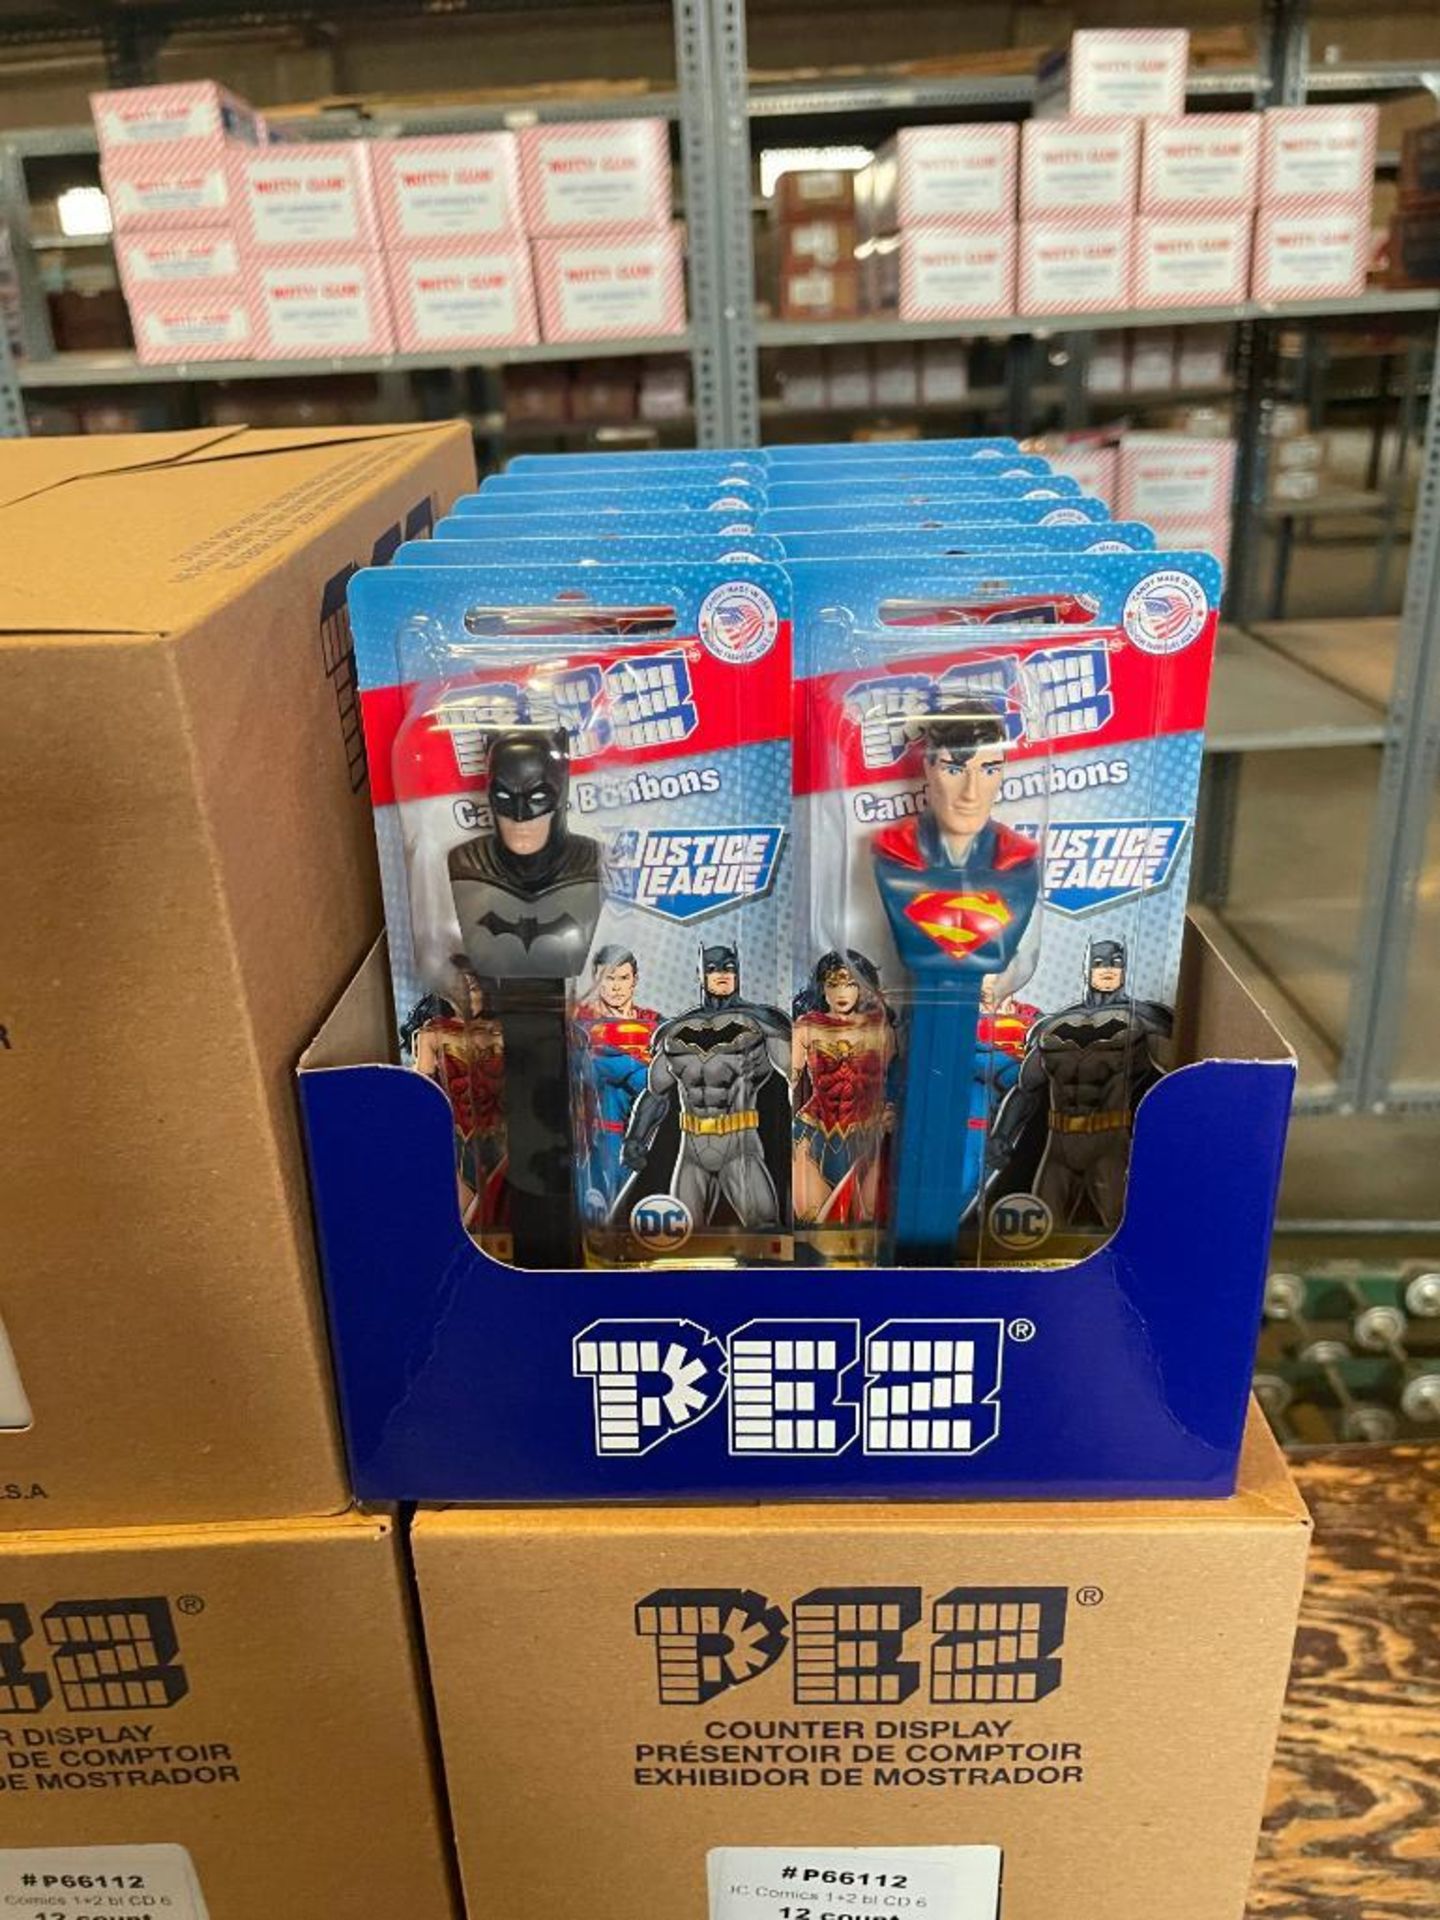 LOT OF APPROX. (6) BOXES OF DC COMICS PEZ DISPENSERS - Image 2 of 2